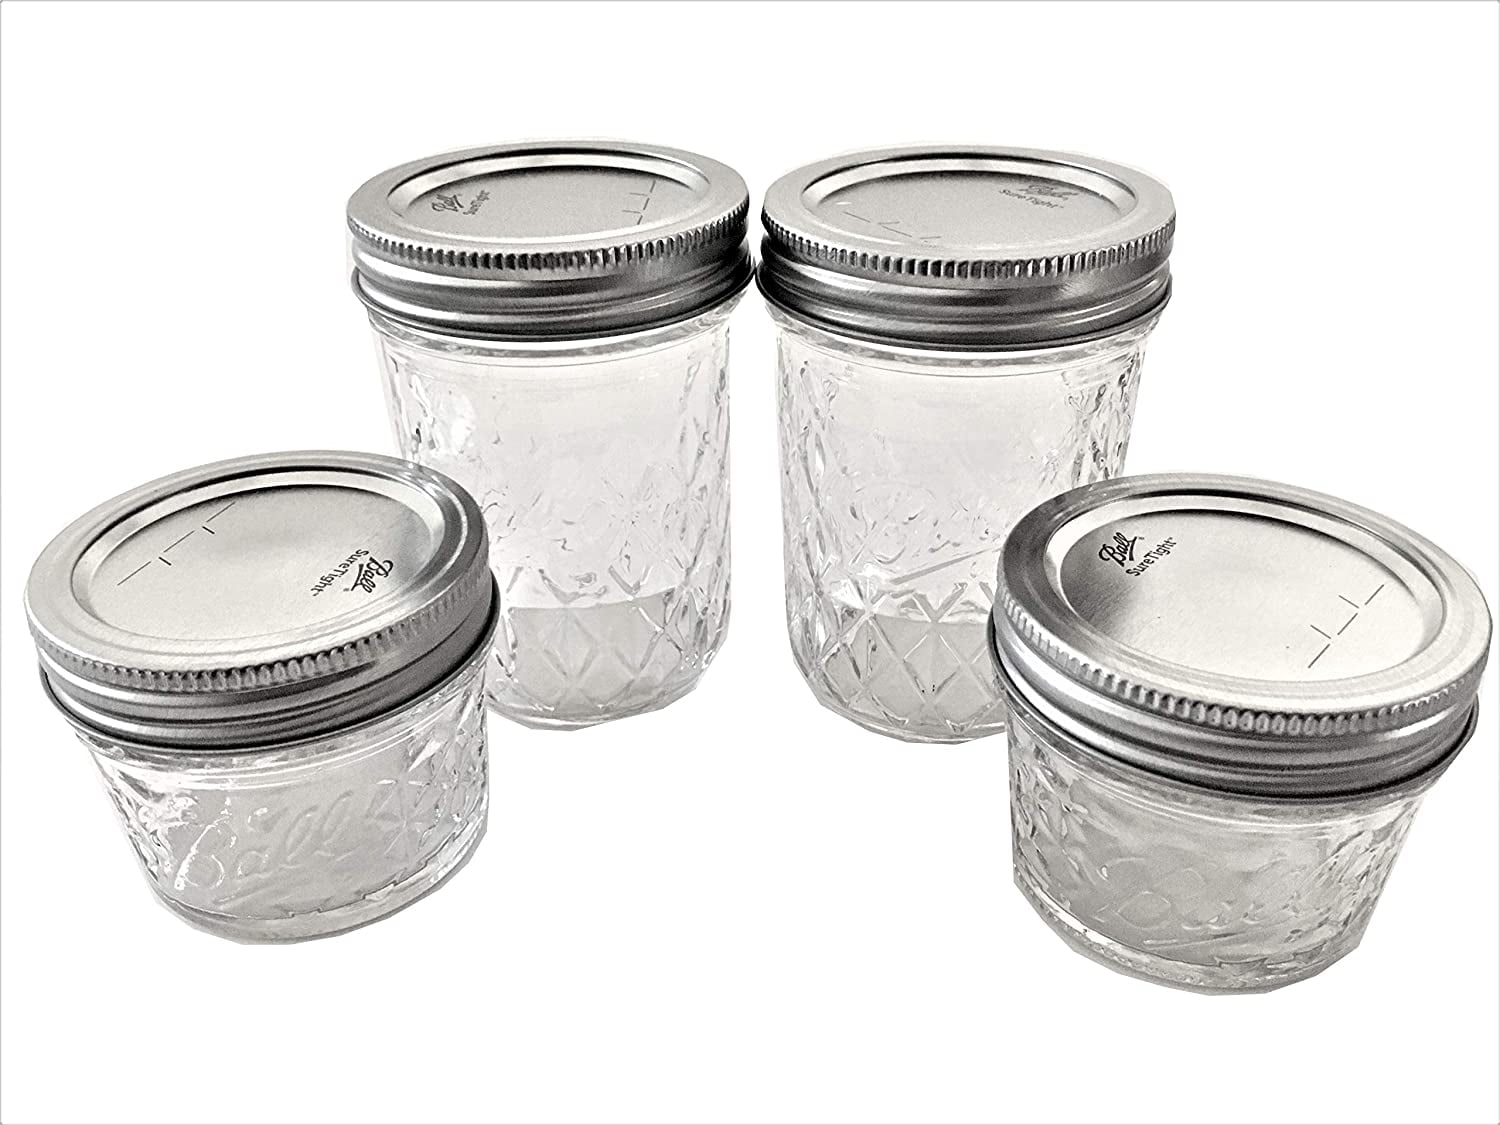 Quilted Crystal Style-Set of 4 each Mason Ball Jelly Jars-4 oz 